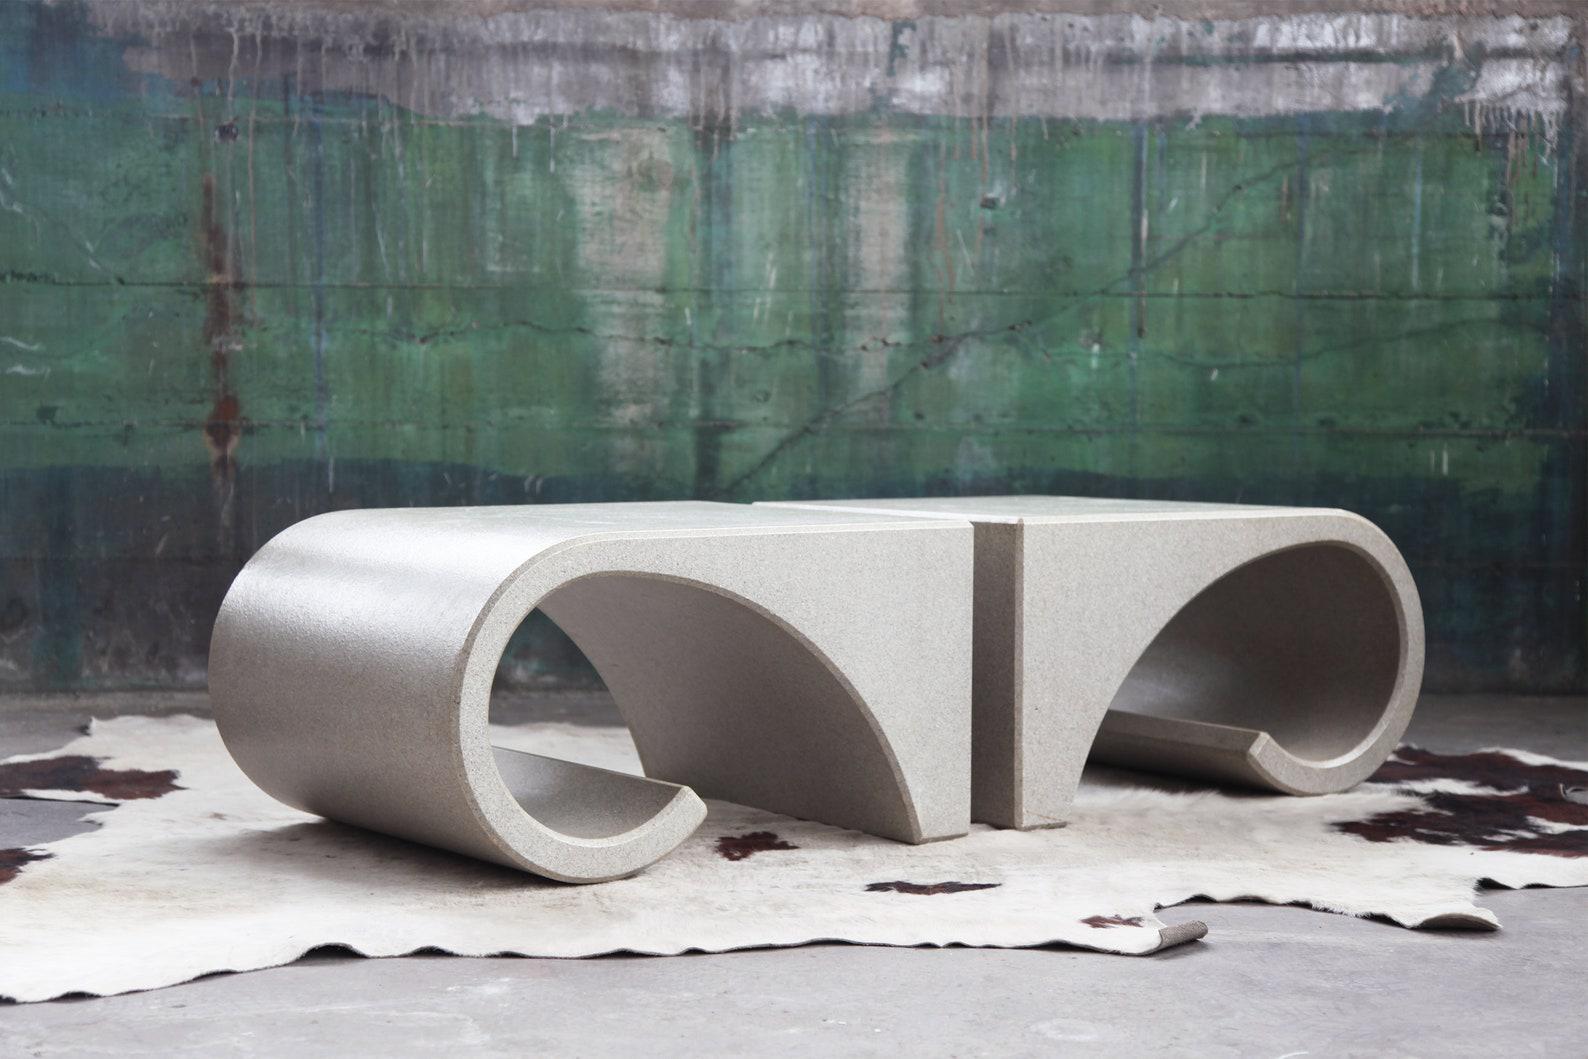 For sale here is an extremely fun and Substantial pair of sculptural scroll end tables. Post Modern Designer's dream!

Priced here for the PAIR.

This set of minimalist, post modern, geometric Miami Regency 1980's coffee / cocktail tables are in